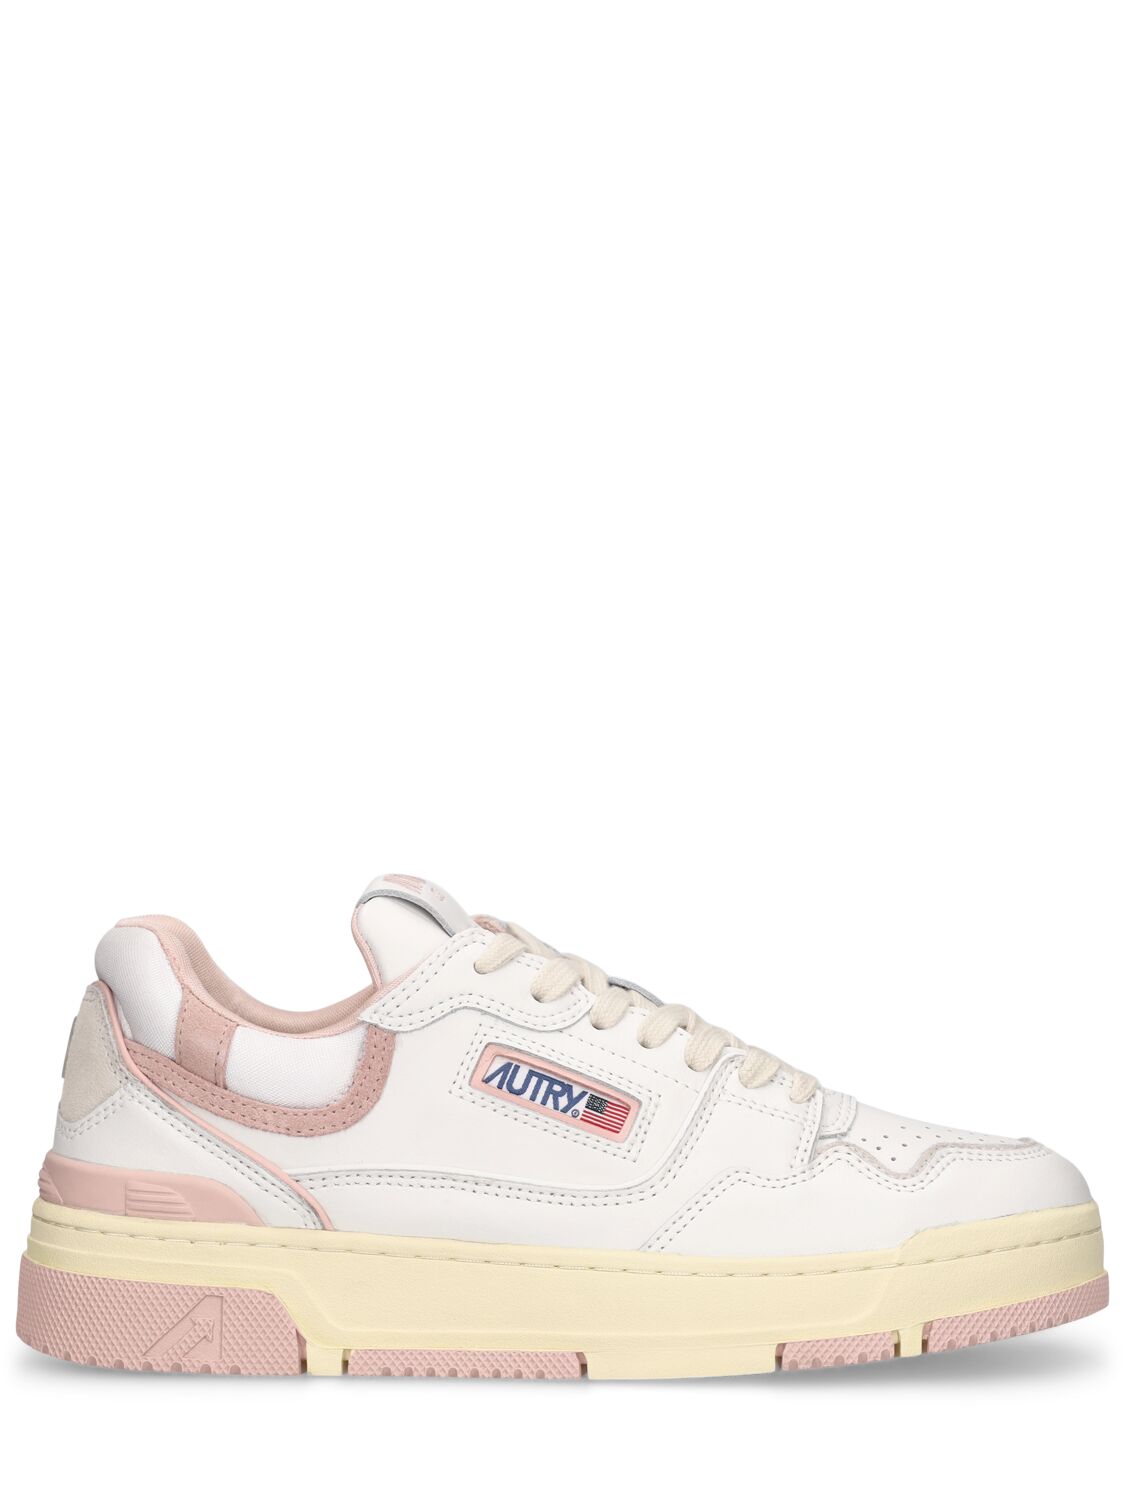 Image of Clc Low Sneakers